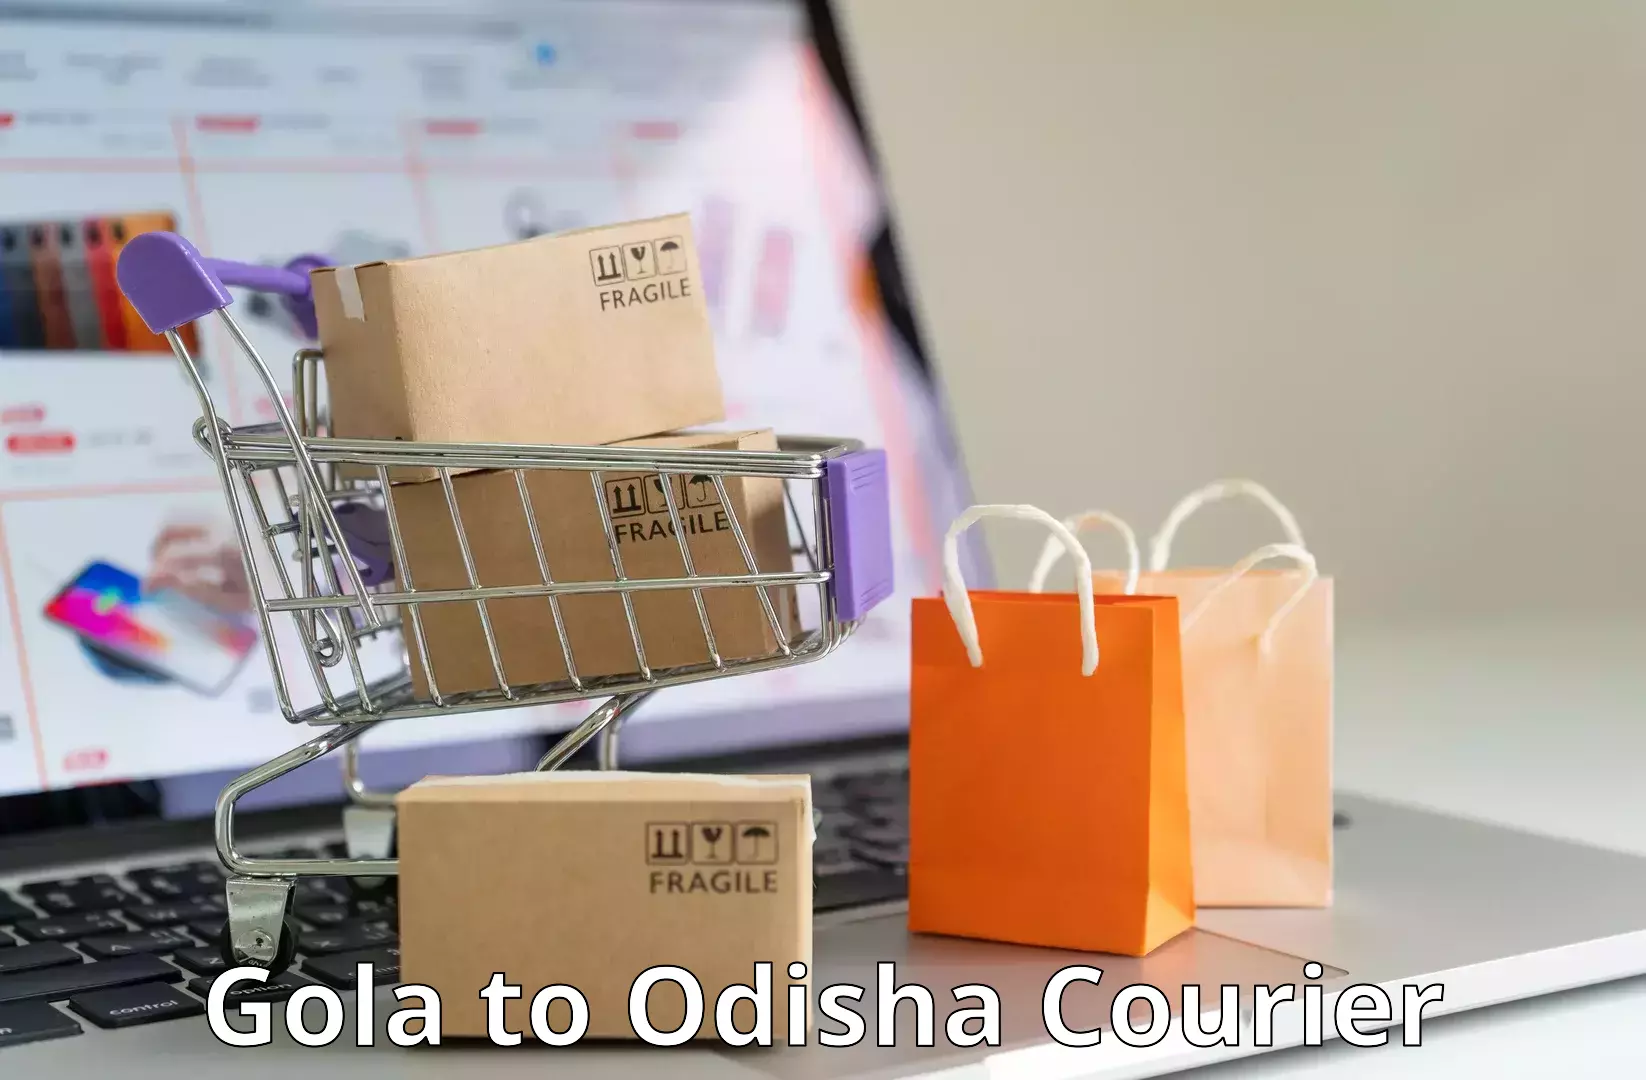 Full-service courier options Gola to Birmitrapur